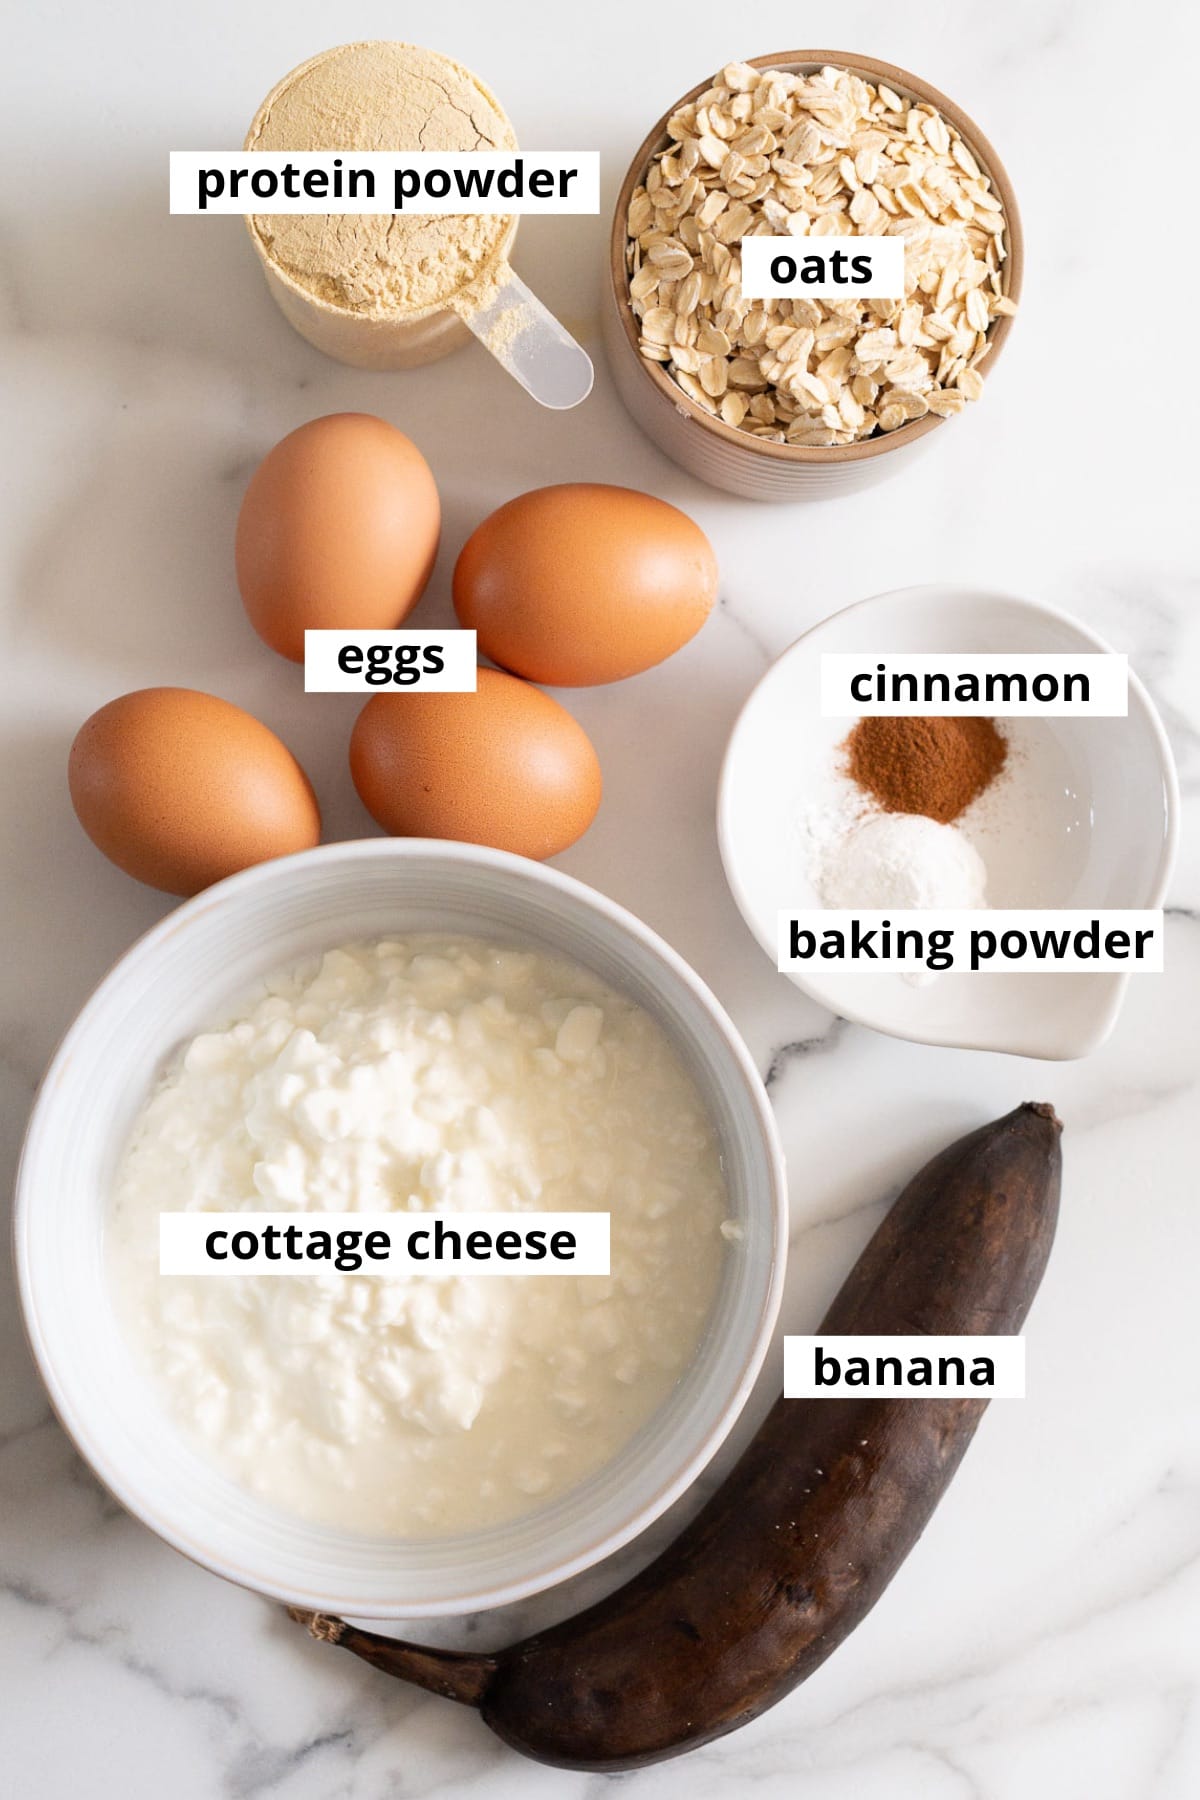 Cottage cheese, protein powder, eggs, oats, banana, baking powder and cinnamon.